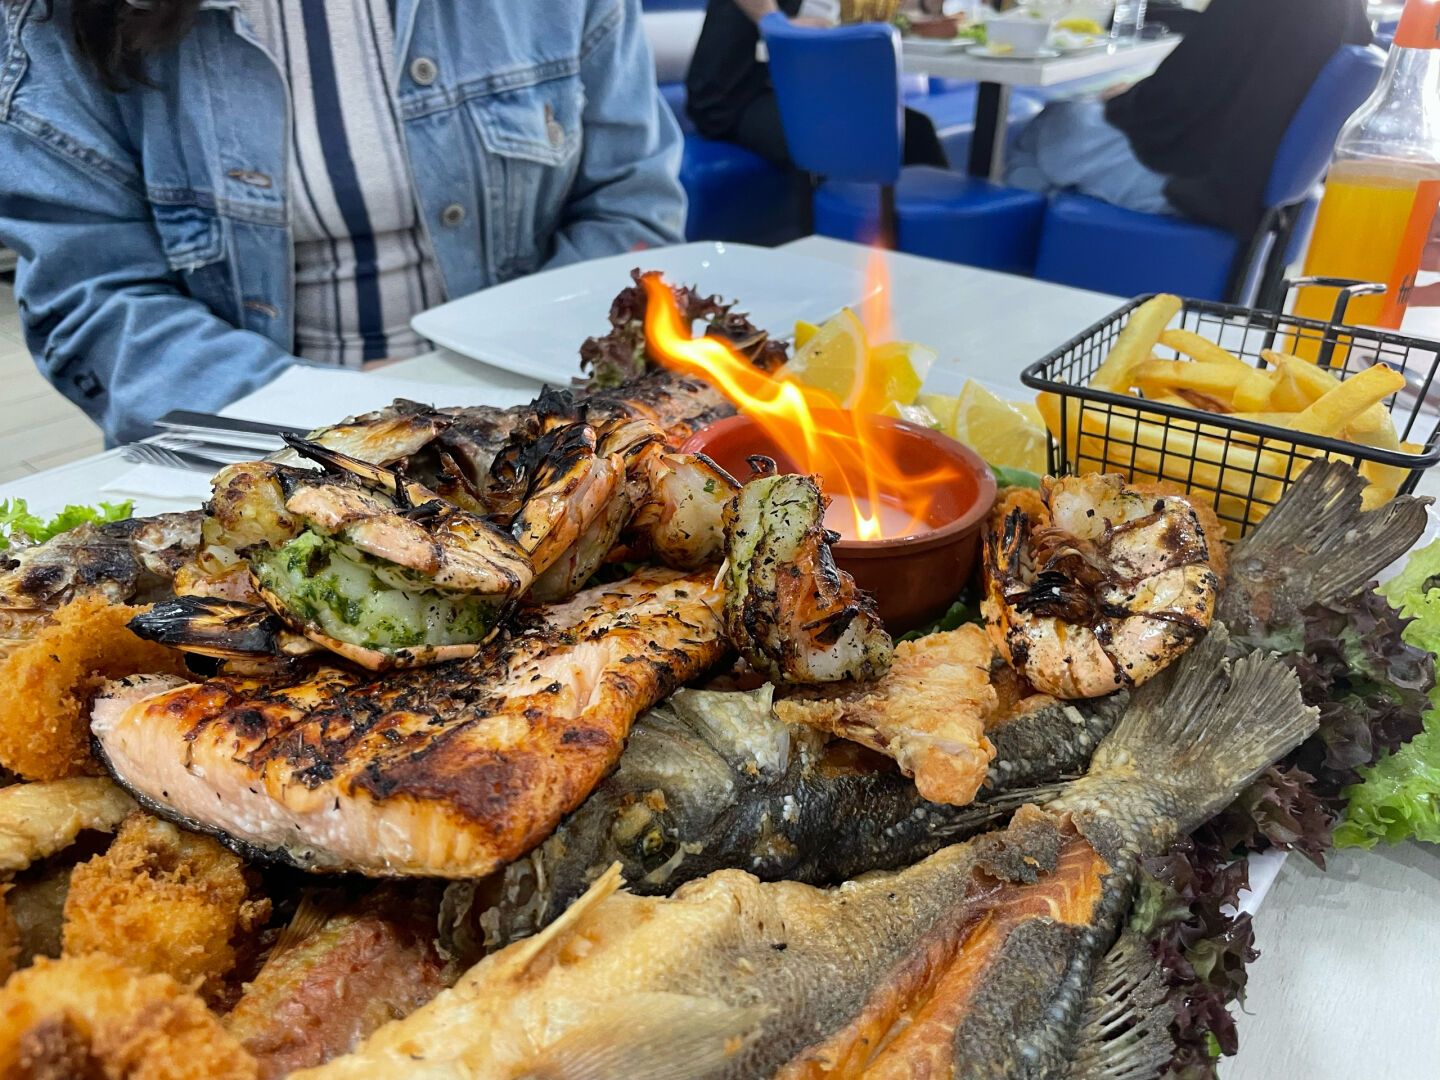 In the photo you can see a plate with a variety of grilled fish and a small pot with salt on fire. It was taken in a restaurant in the Neukölln neighborhood in Berlin.